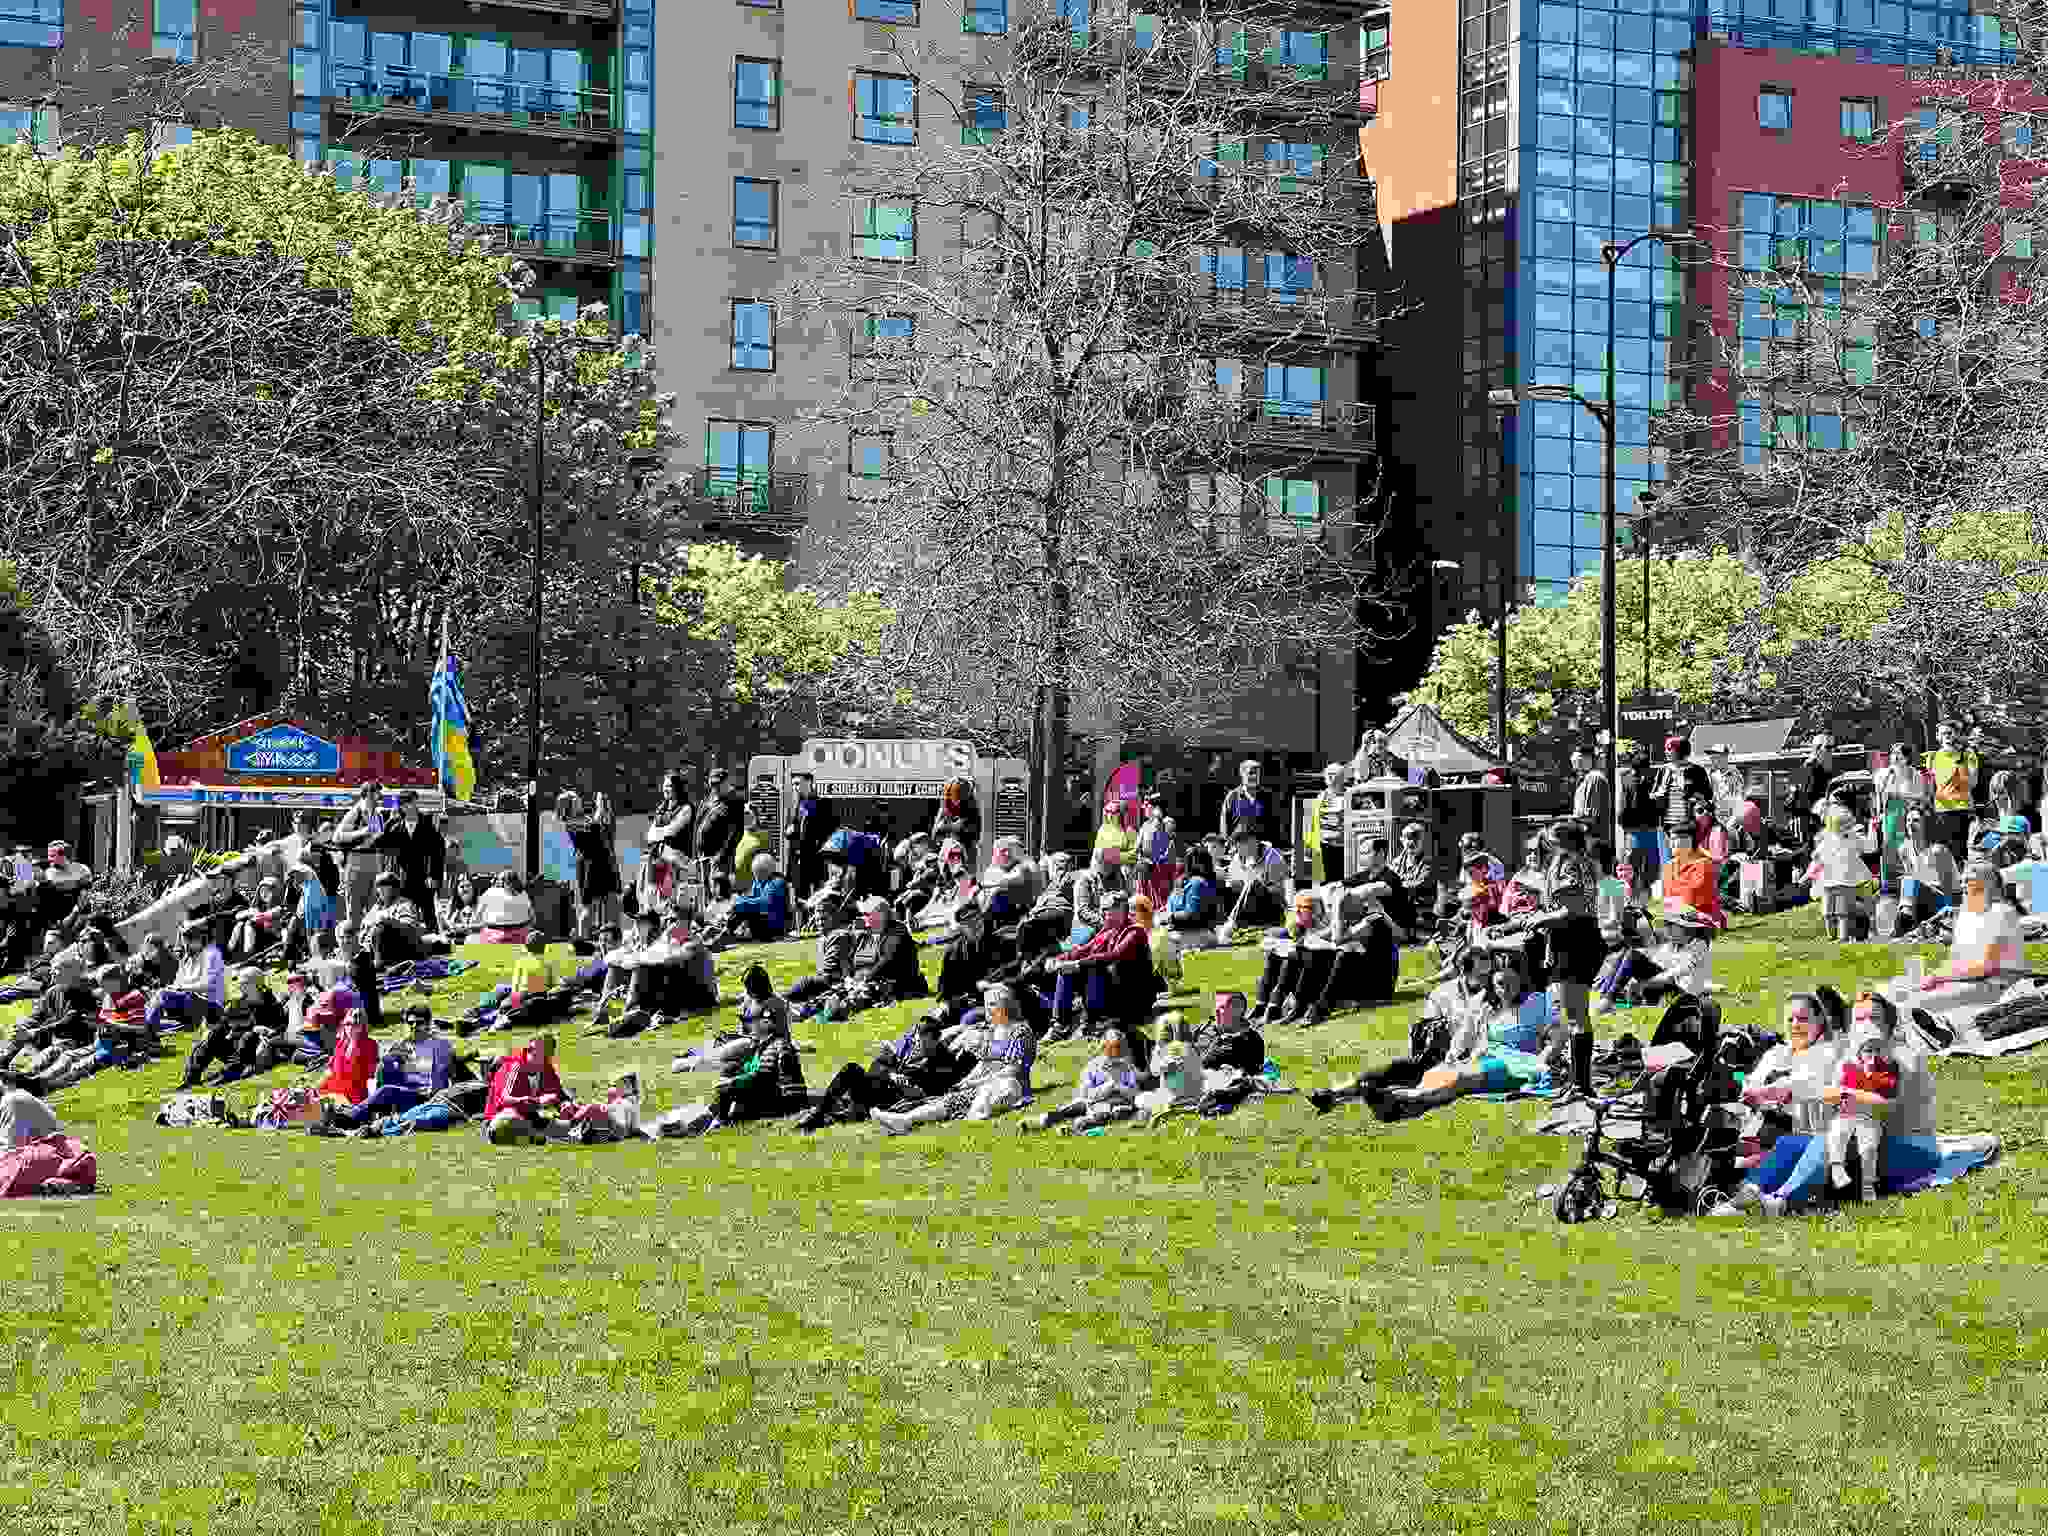 People sit on Sheffield's Devonshire Green in the sunshine, watching acts perform on stage